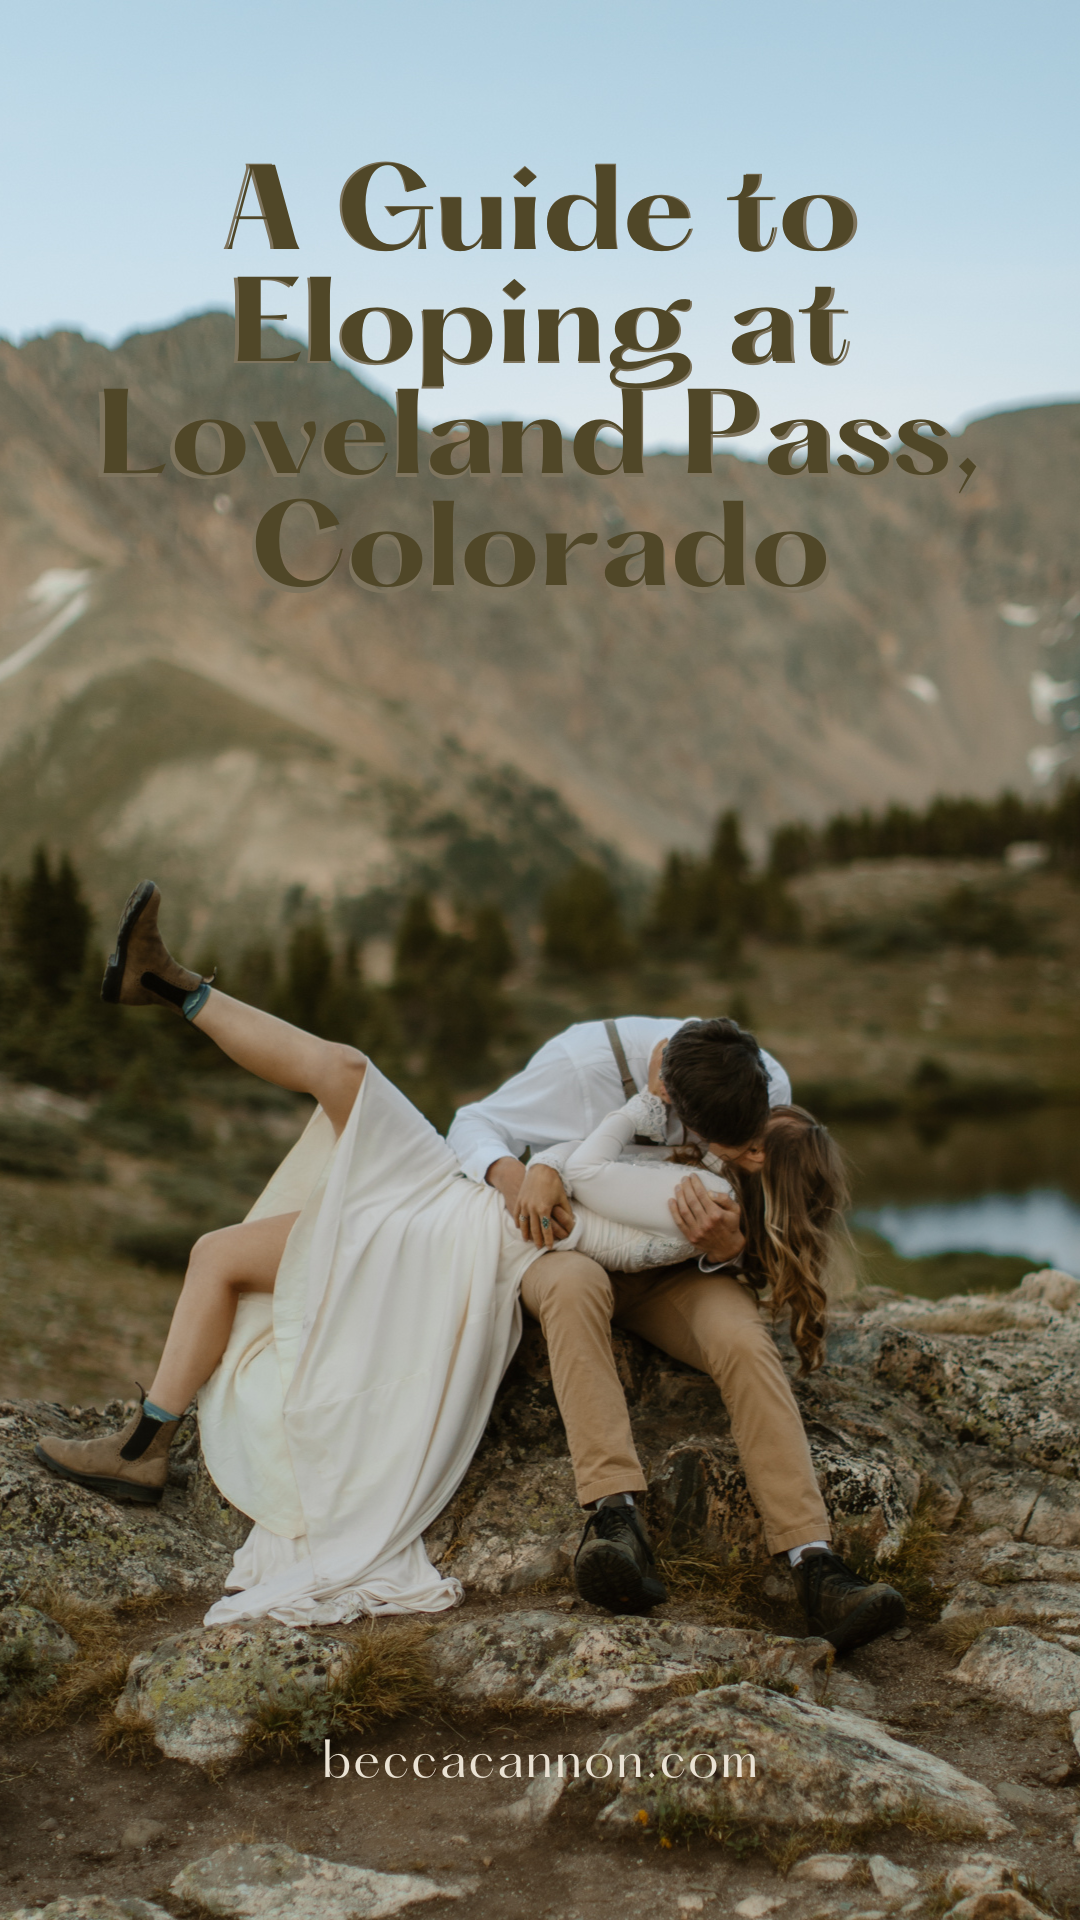 A guide to eloping at Loveland Pass